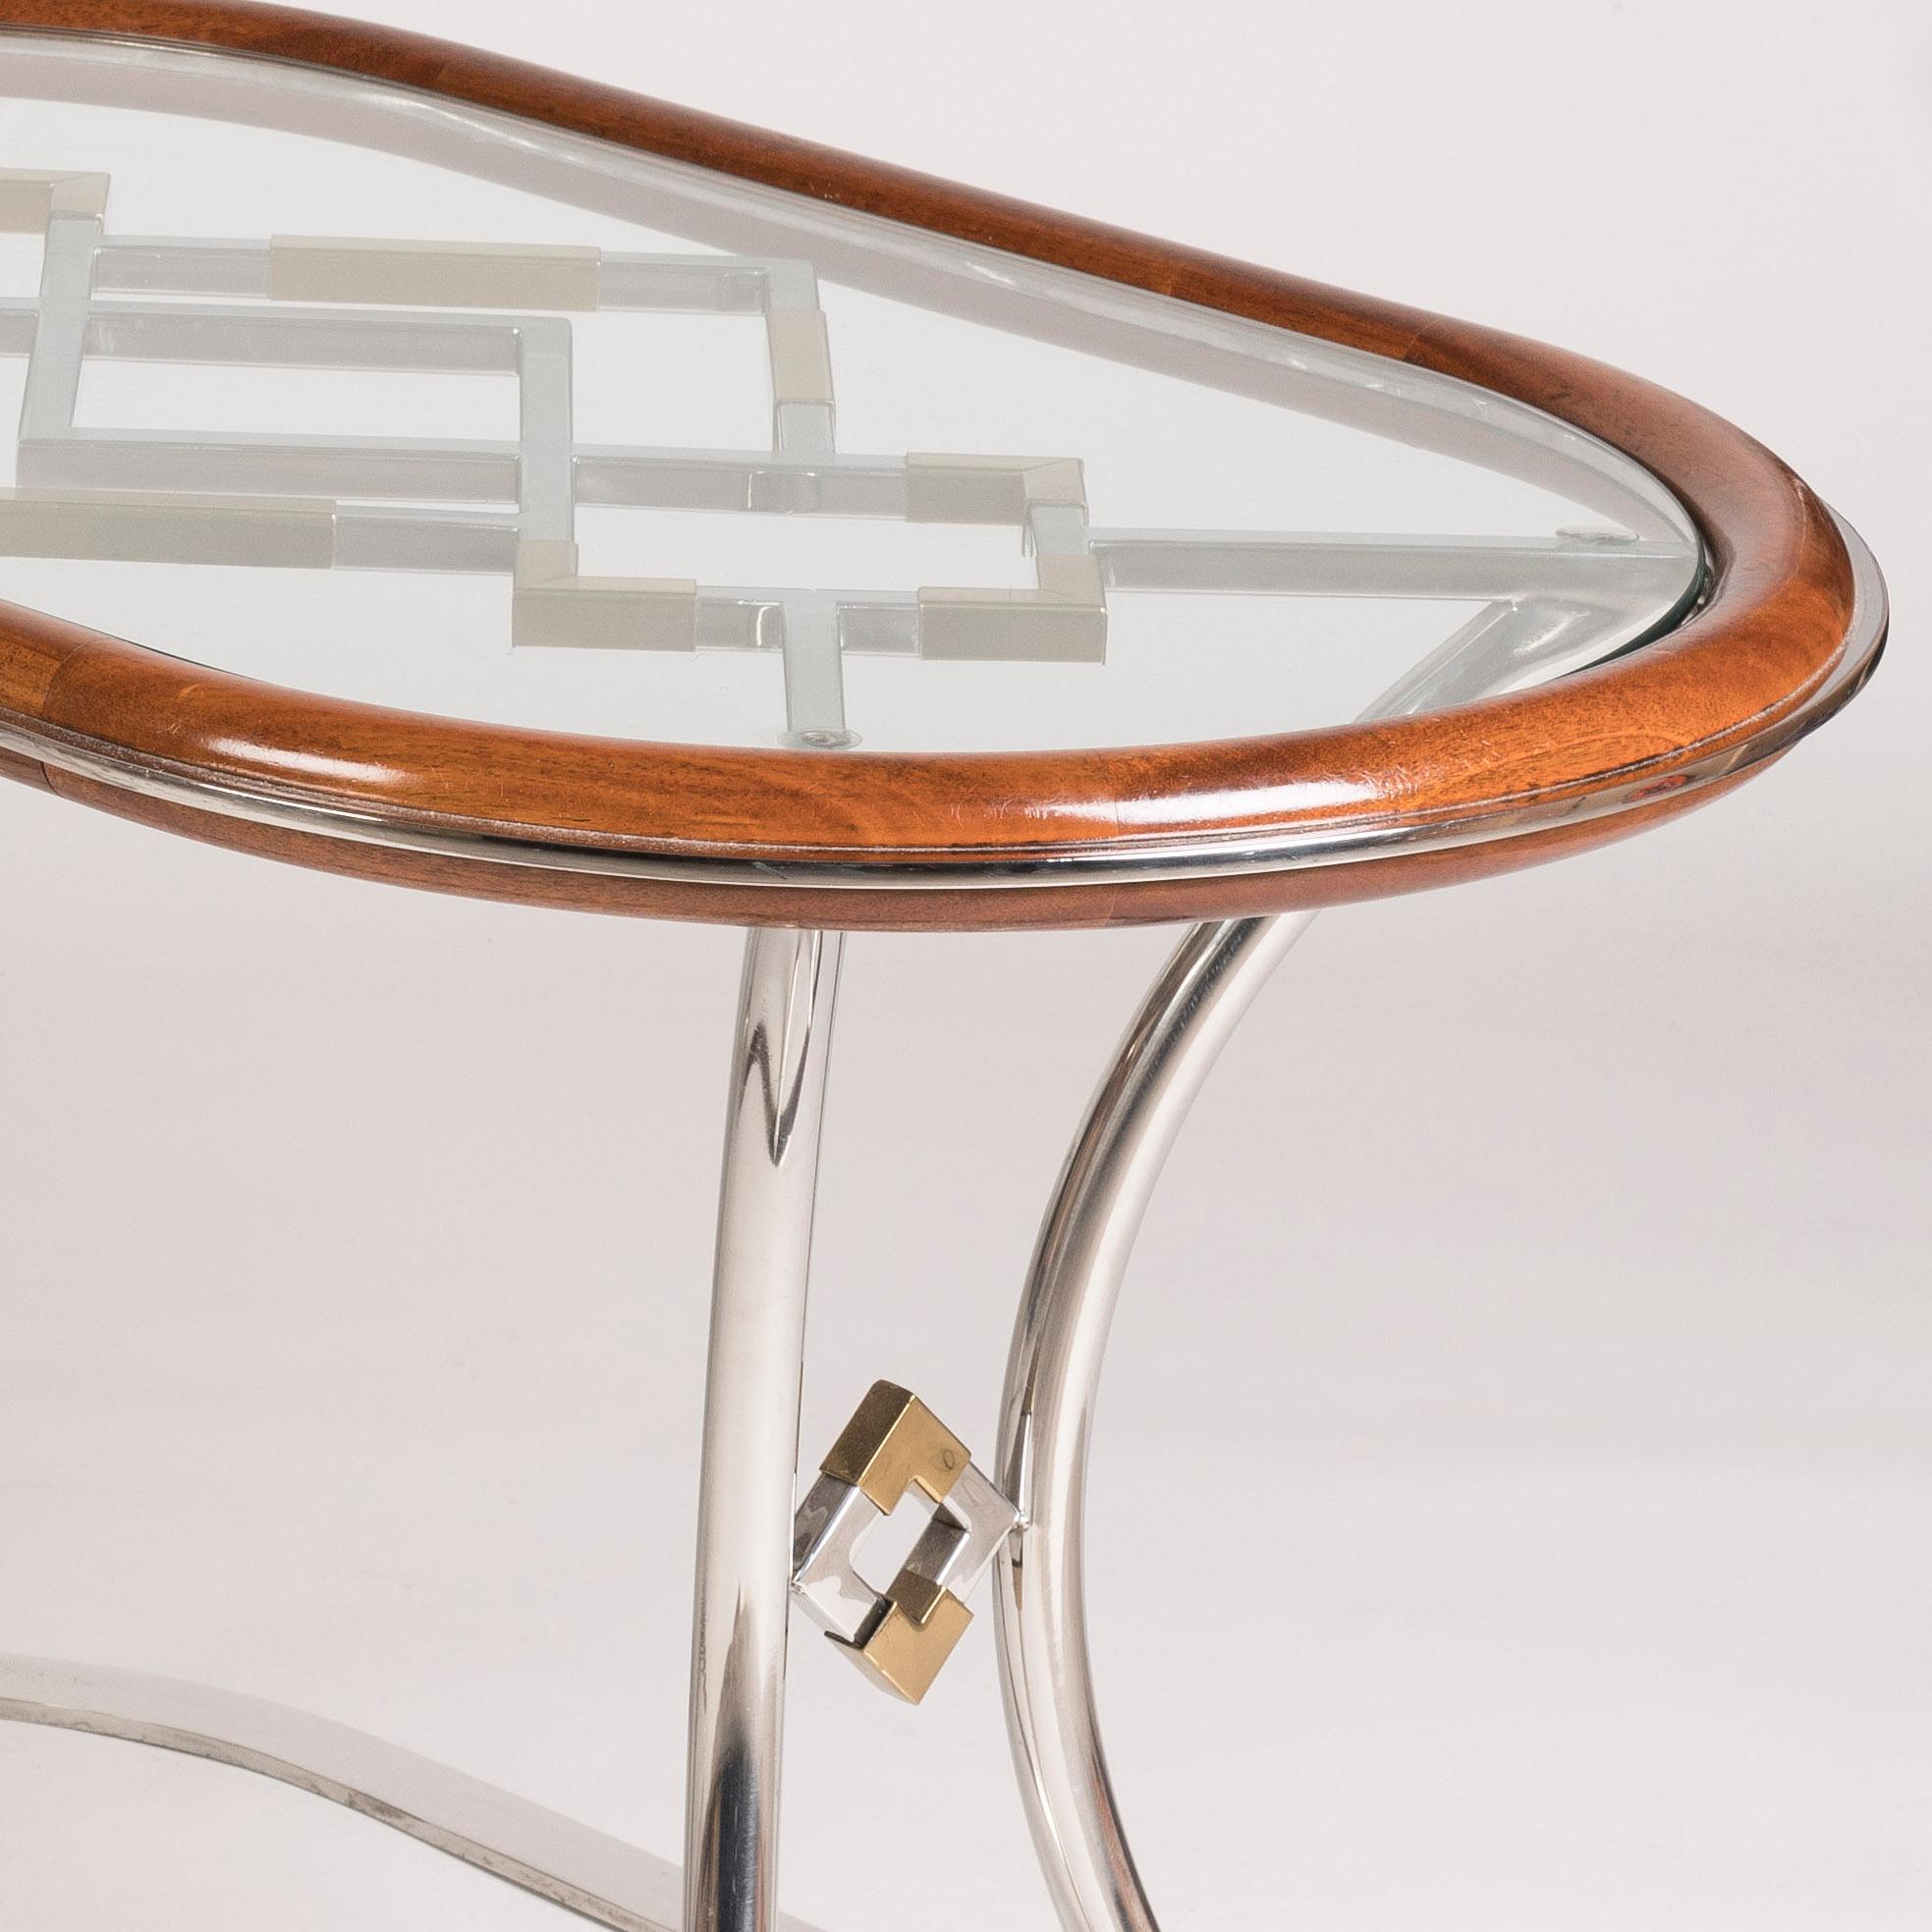 Pair of French Post-War Modernist Oval Coffee Tables attributed to Maison Jansen For Sale 1